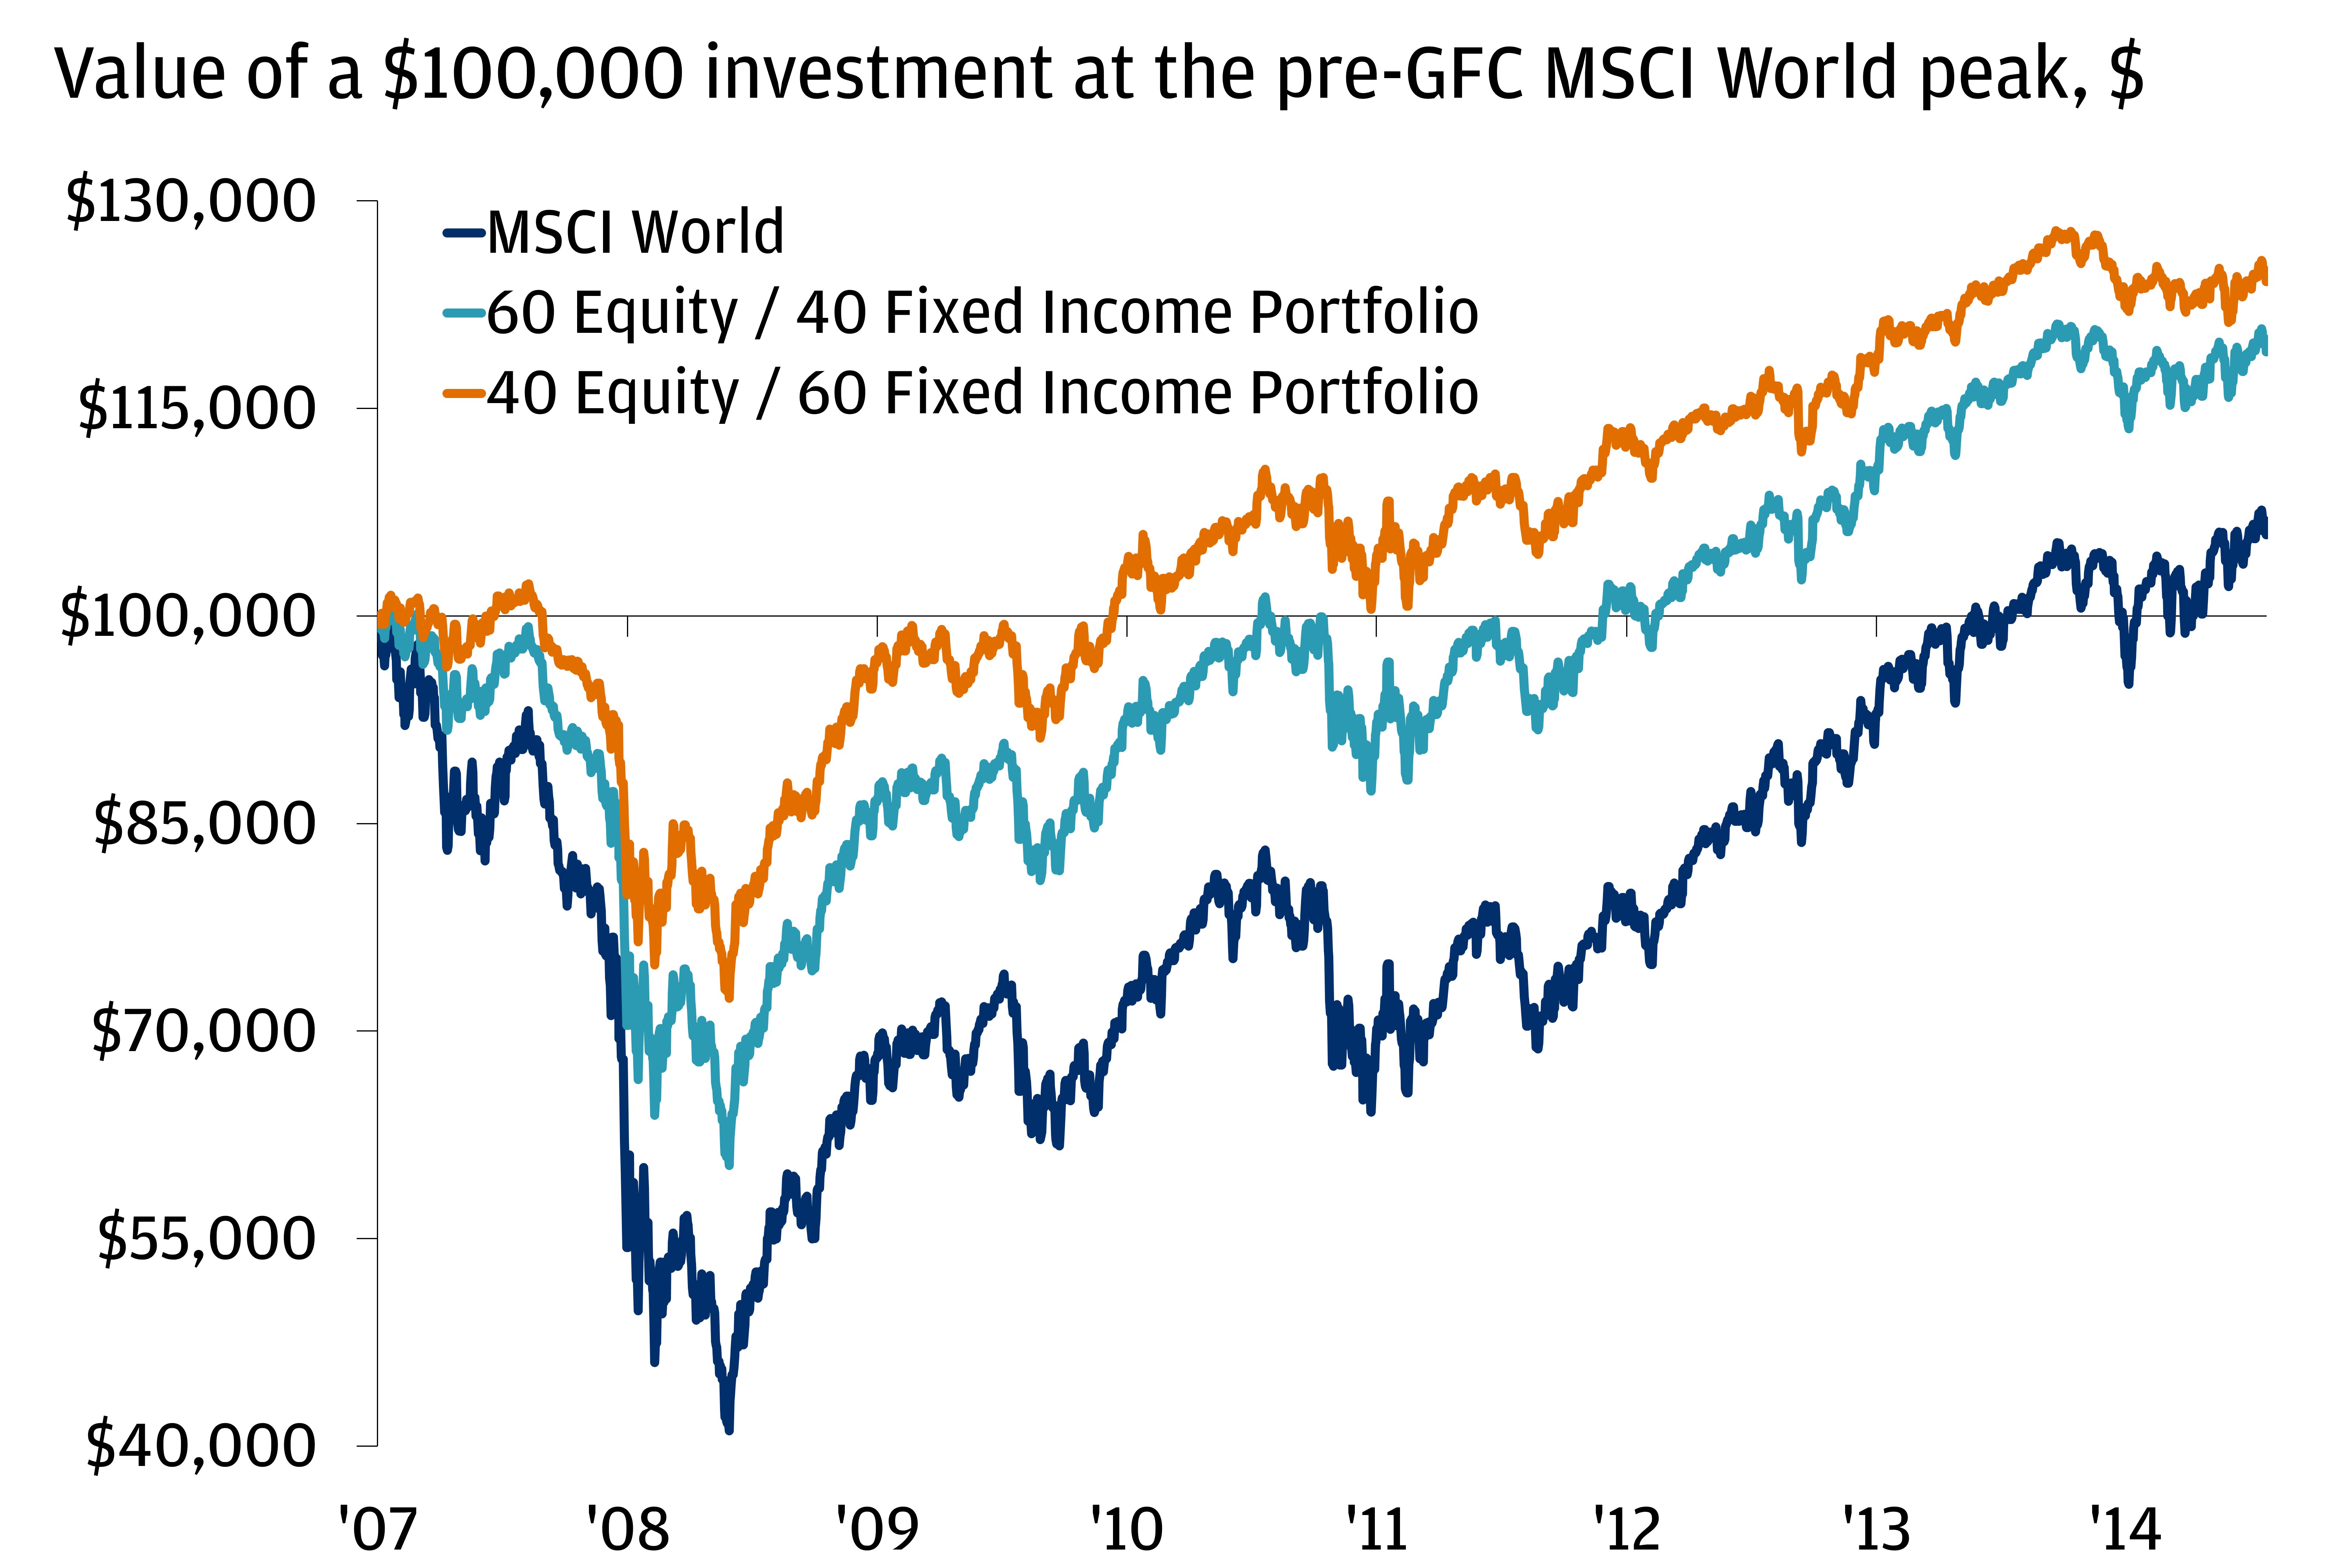 The chart depicts the portfolio returns of a $100,000 investment into the MSCI World and the hypothetical portfolio with 60% invested in Equity (MSCI World) and 40% invested in Fixed Income (Global Aggregate Bond Index), and another hypothetical portfolio with 40% in Equity (MSCI World) and 60% in Fixed Income (Global Aggregate Bond Index) from October 2007 to May 2015.